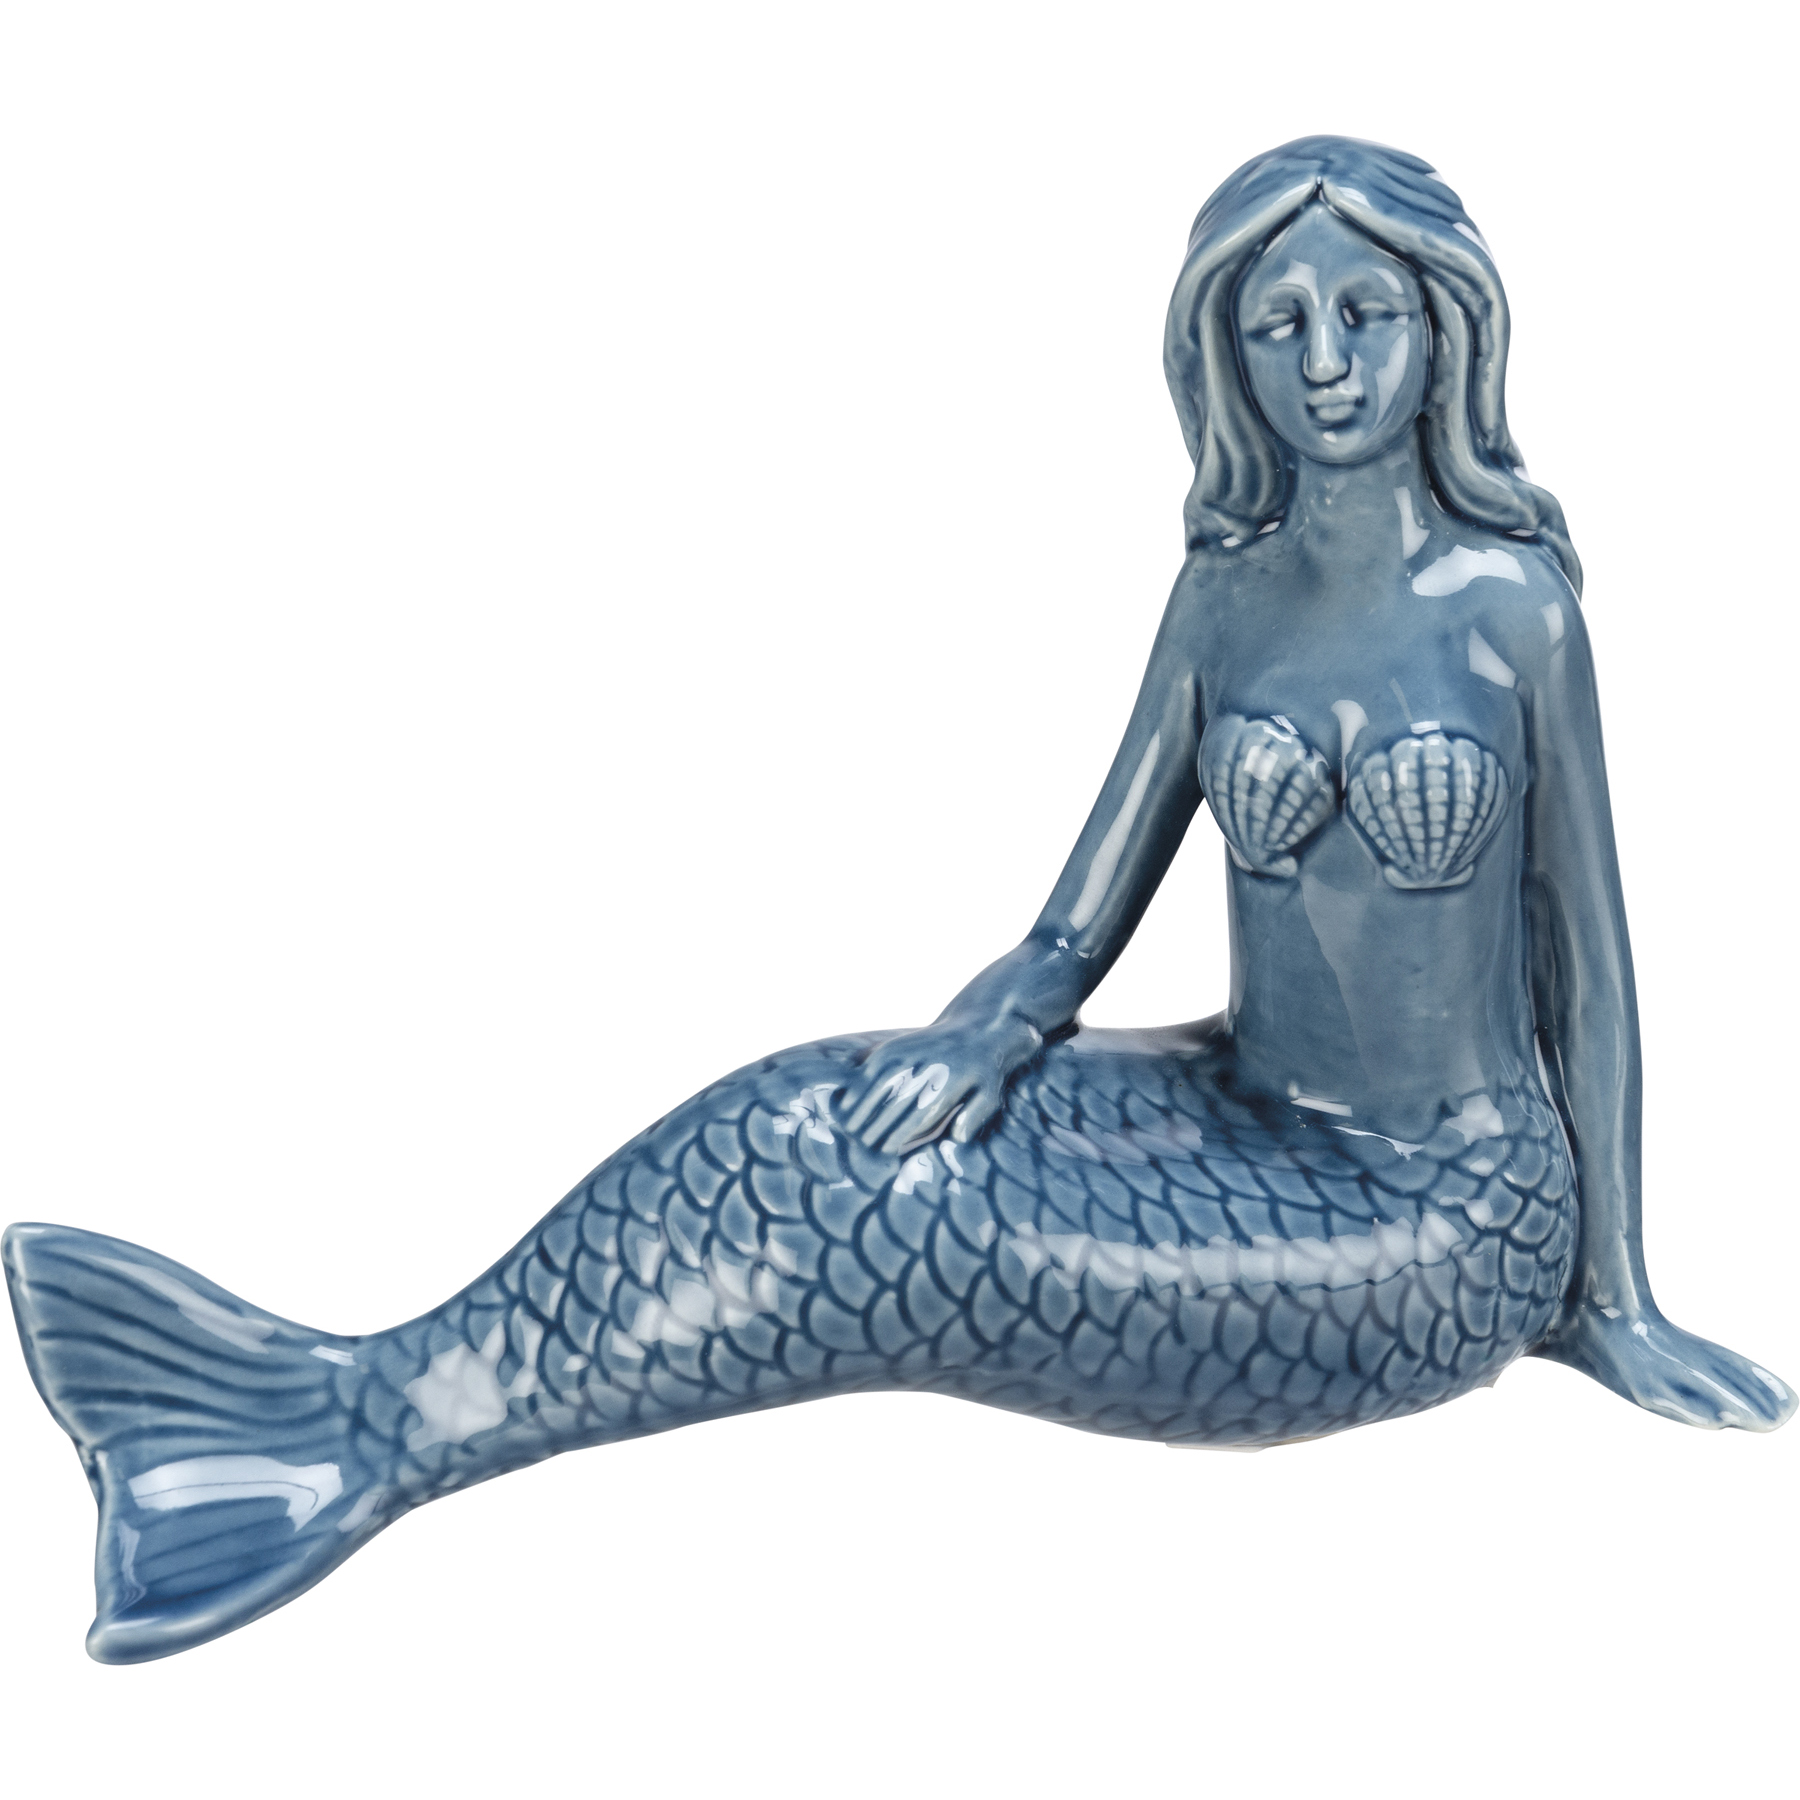 Figurine Mermaid Beach Collection Primitives By Kathy